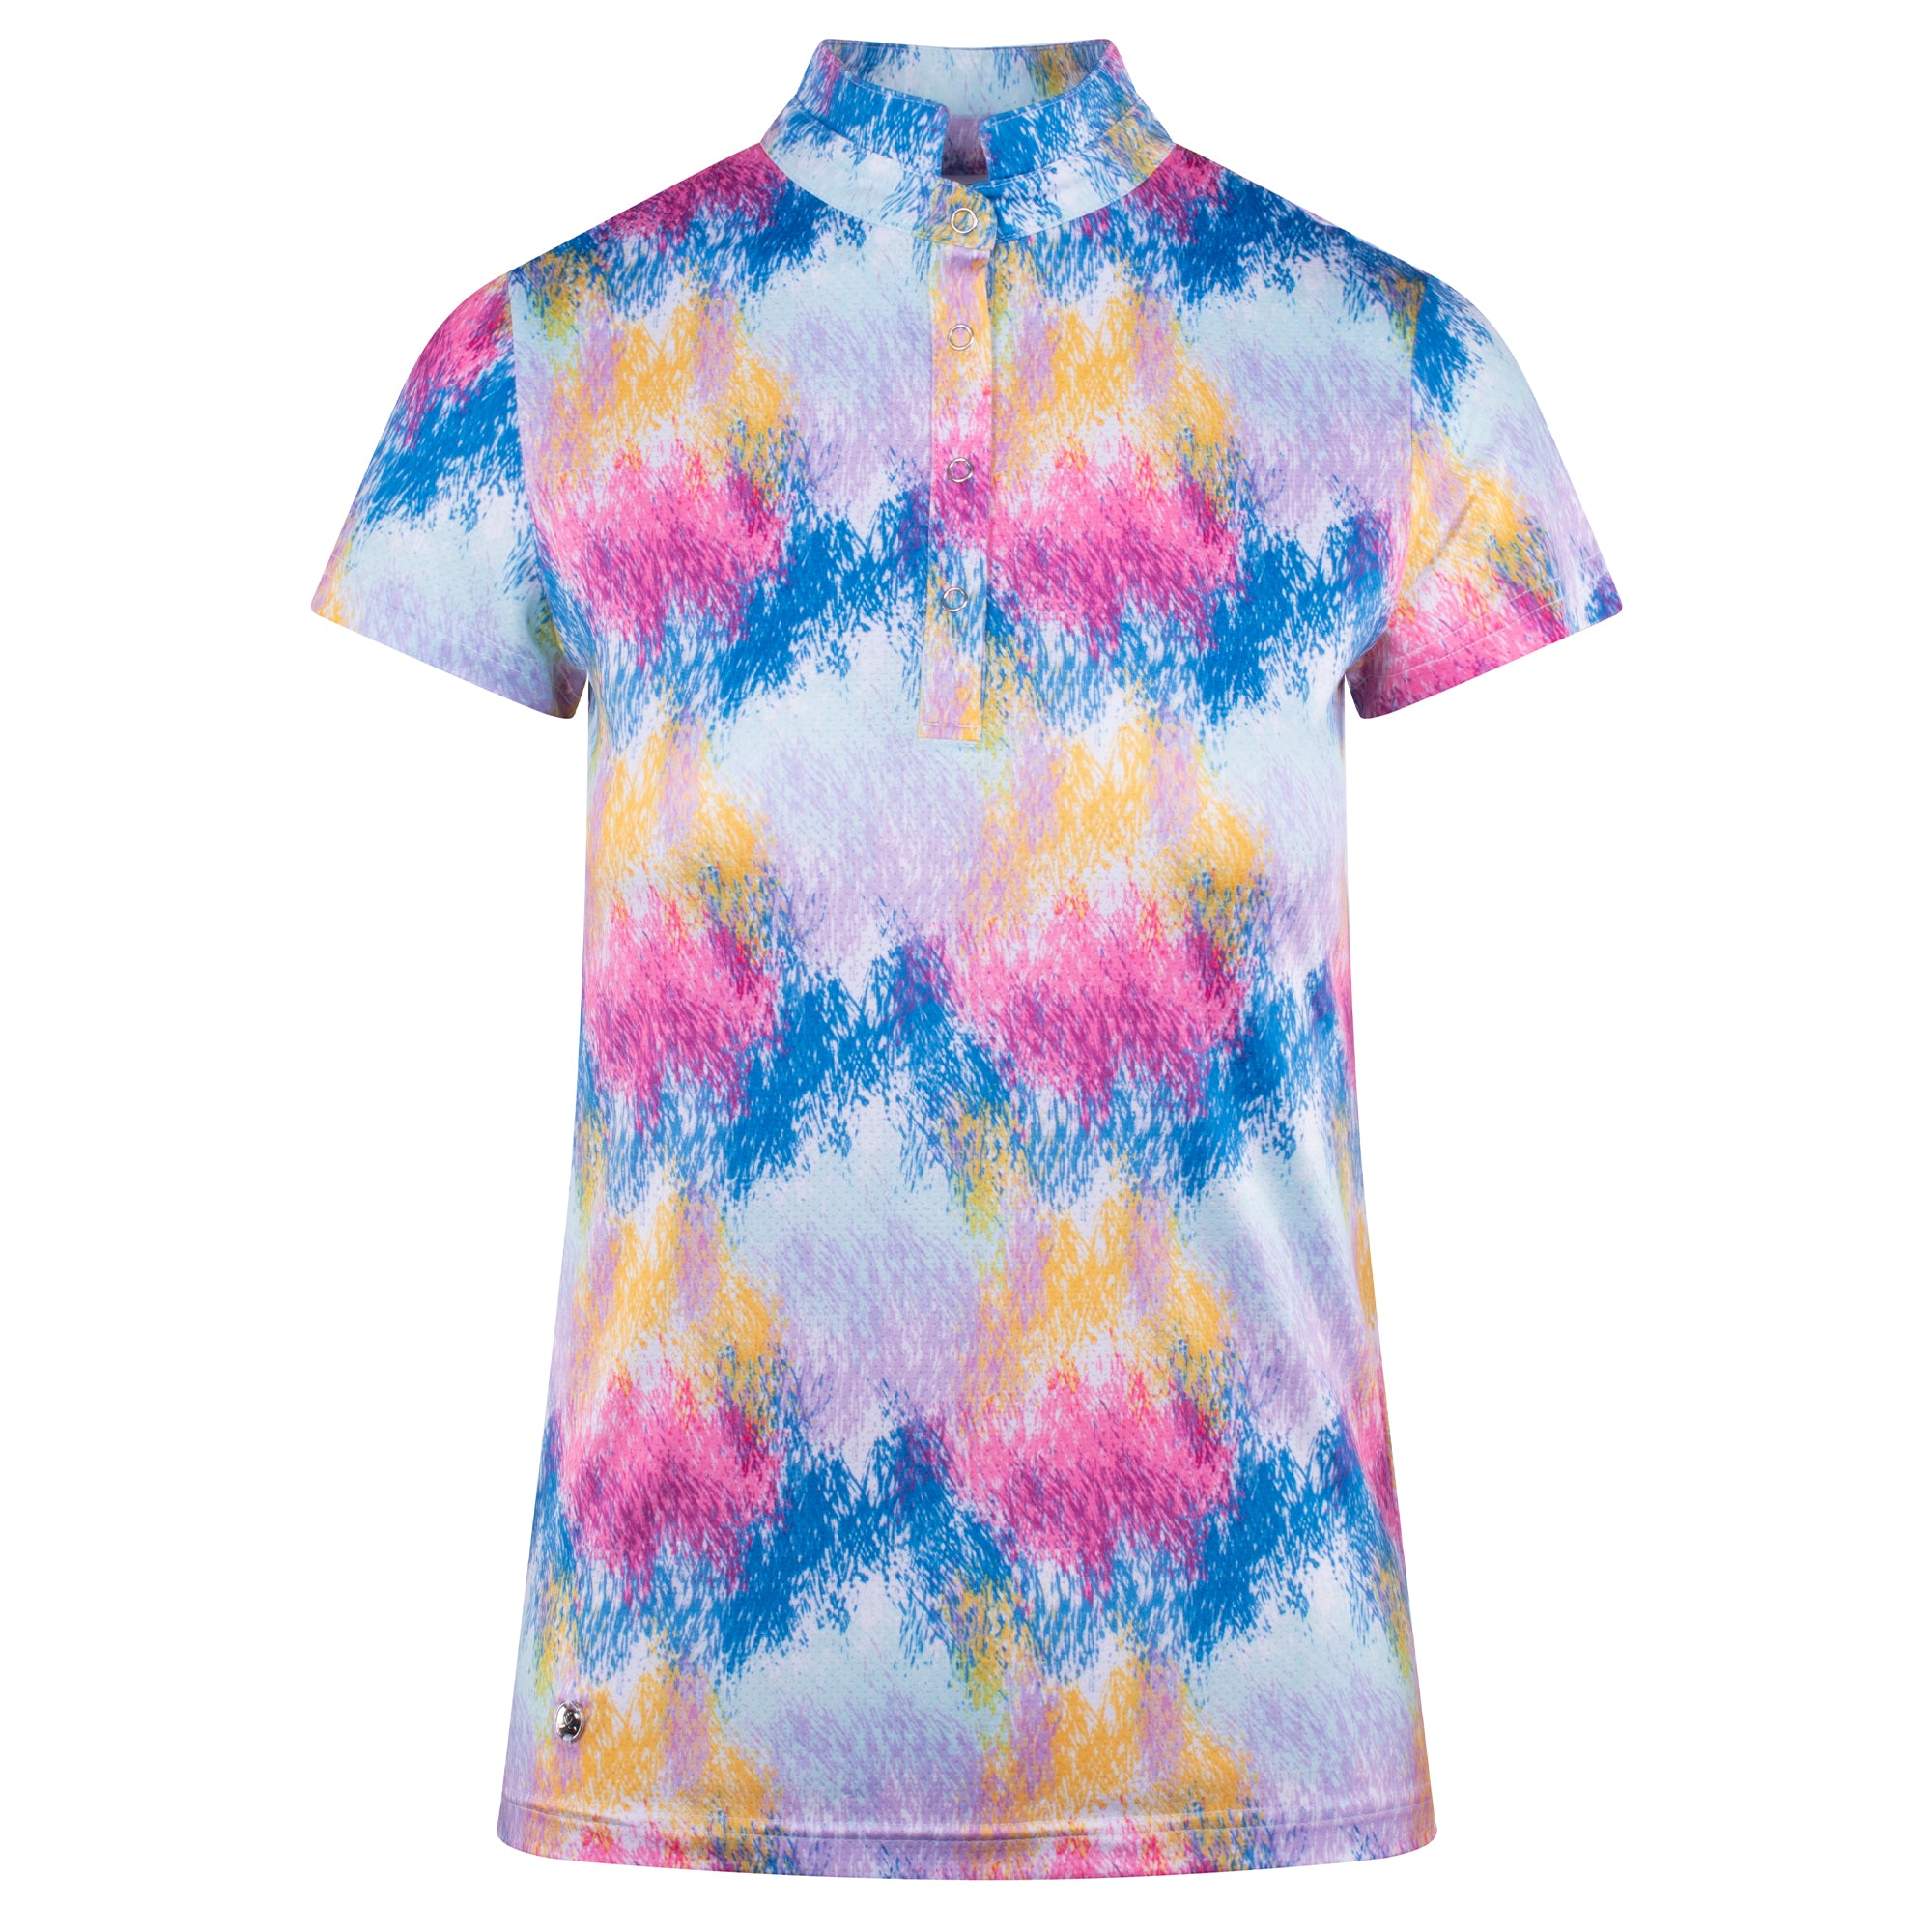 multicolour patterned ladies golf top with buttons 